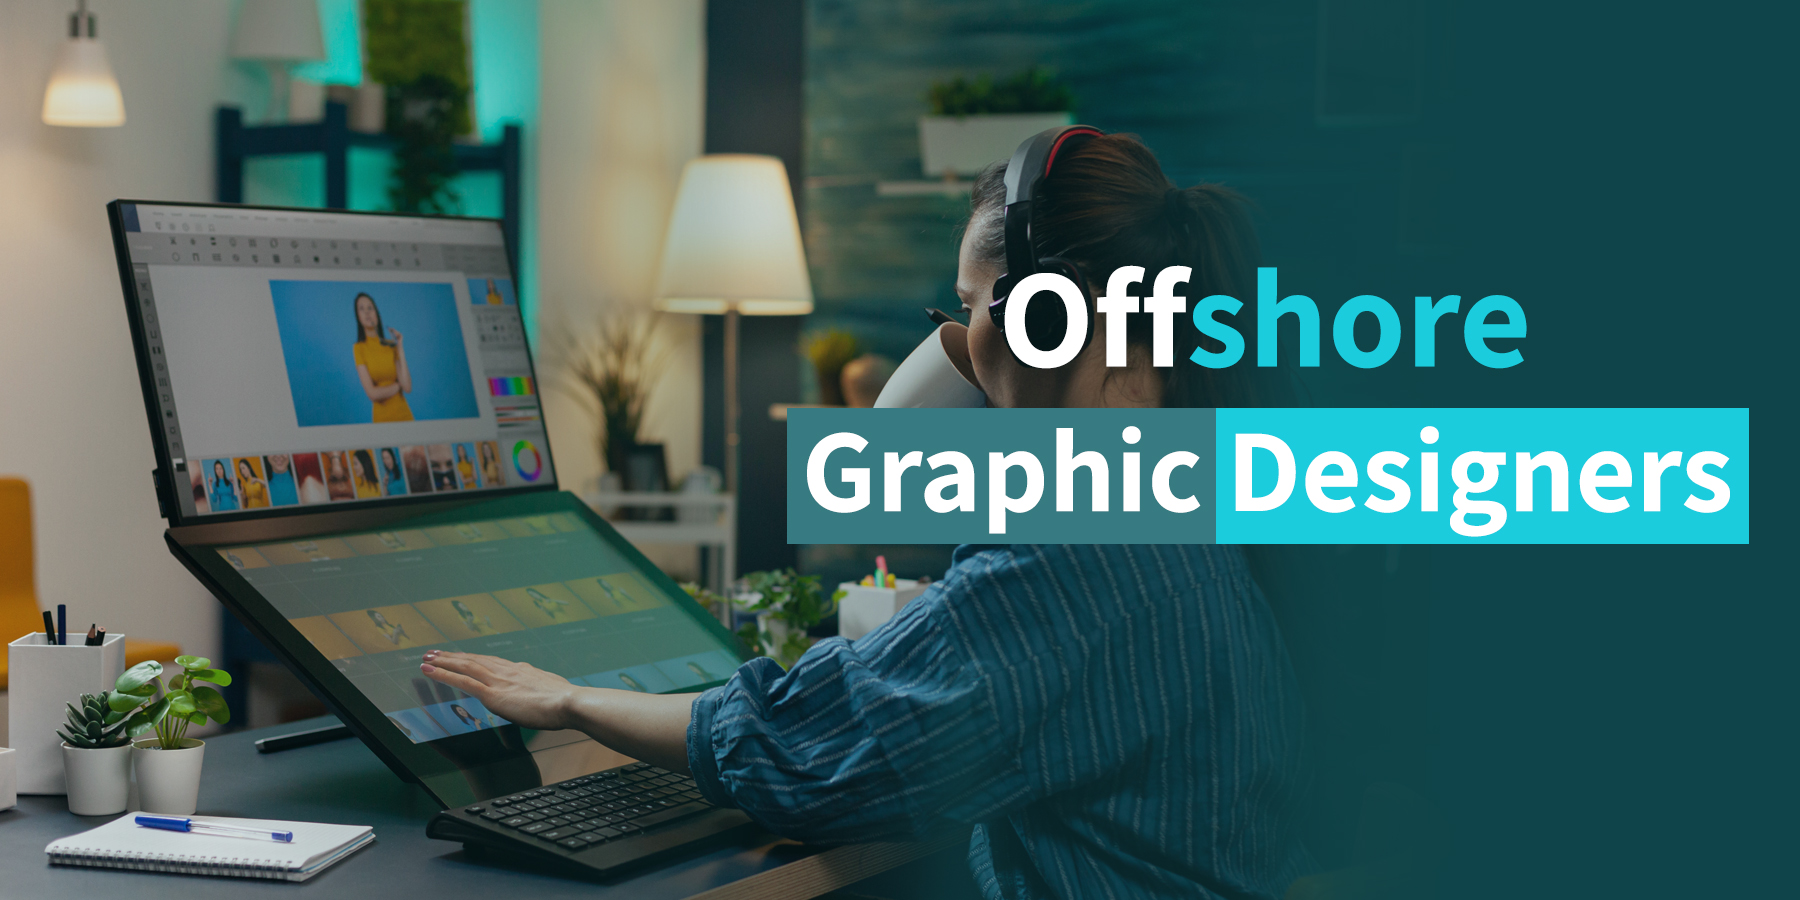 How to Test the Skills of a Remote Graphic Designer Before Hiring